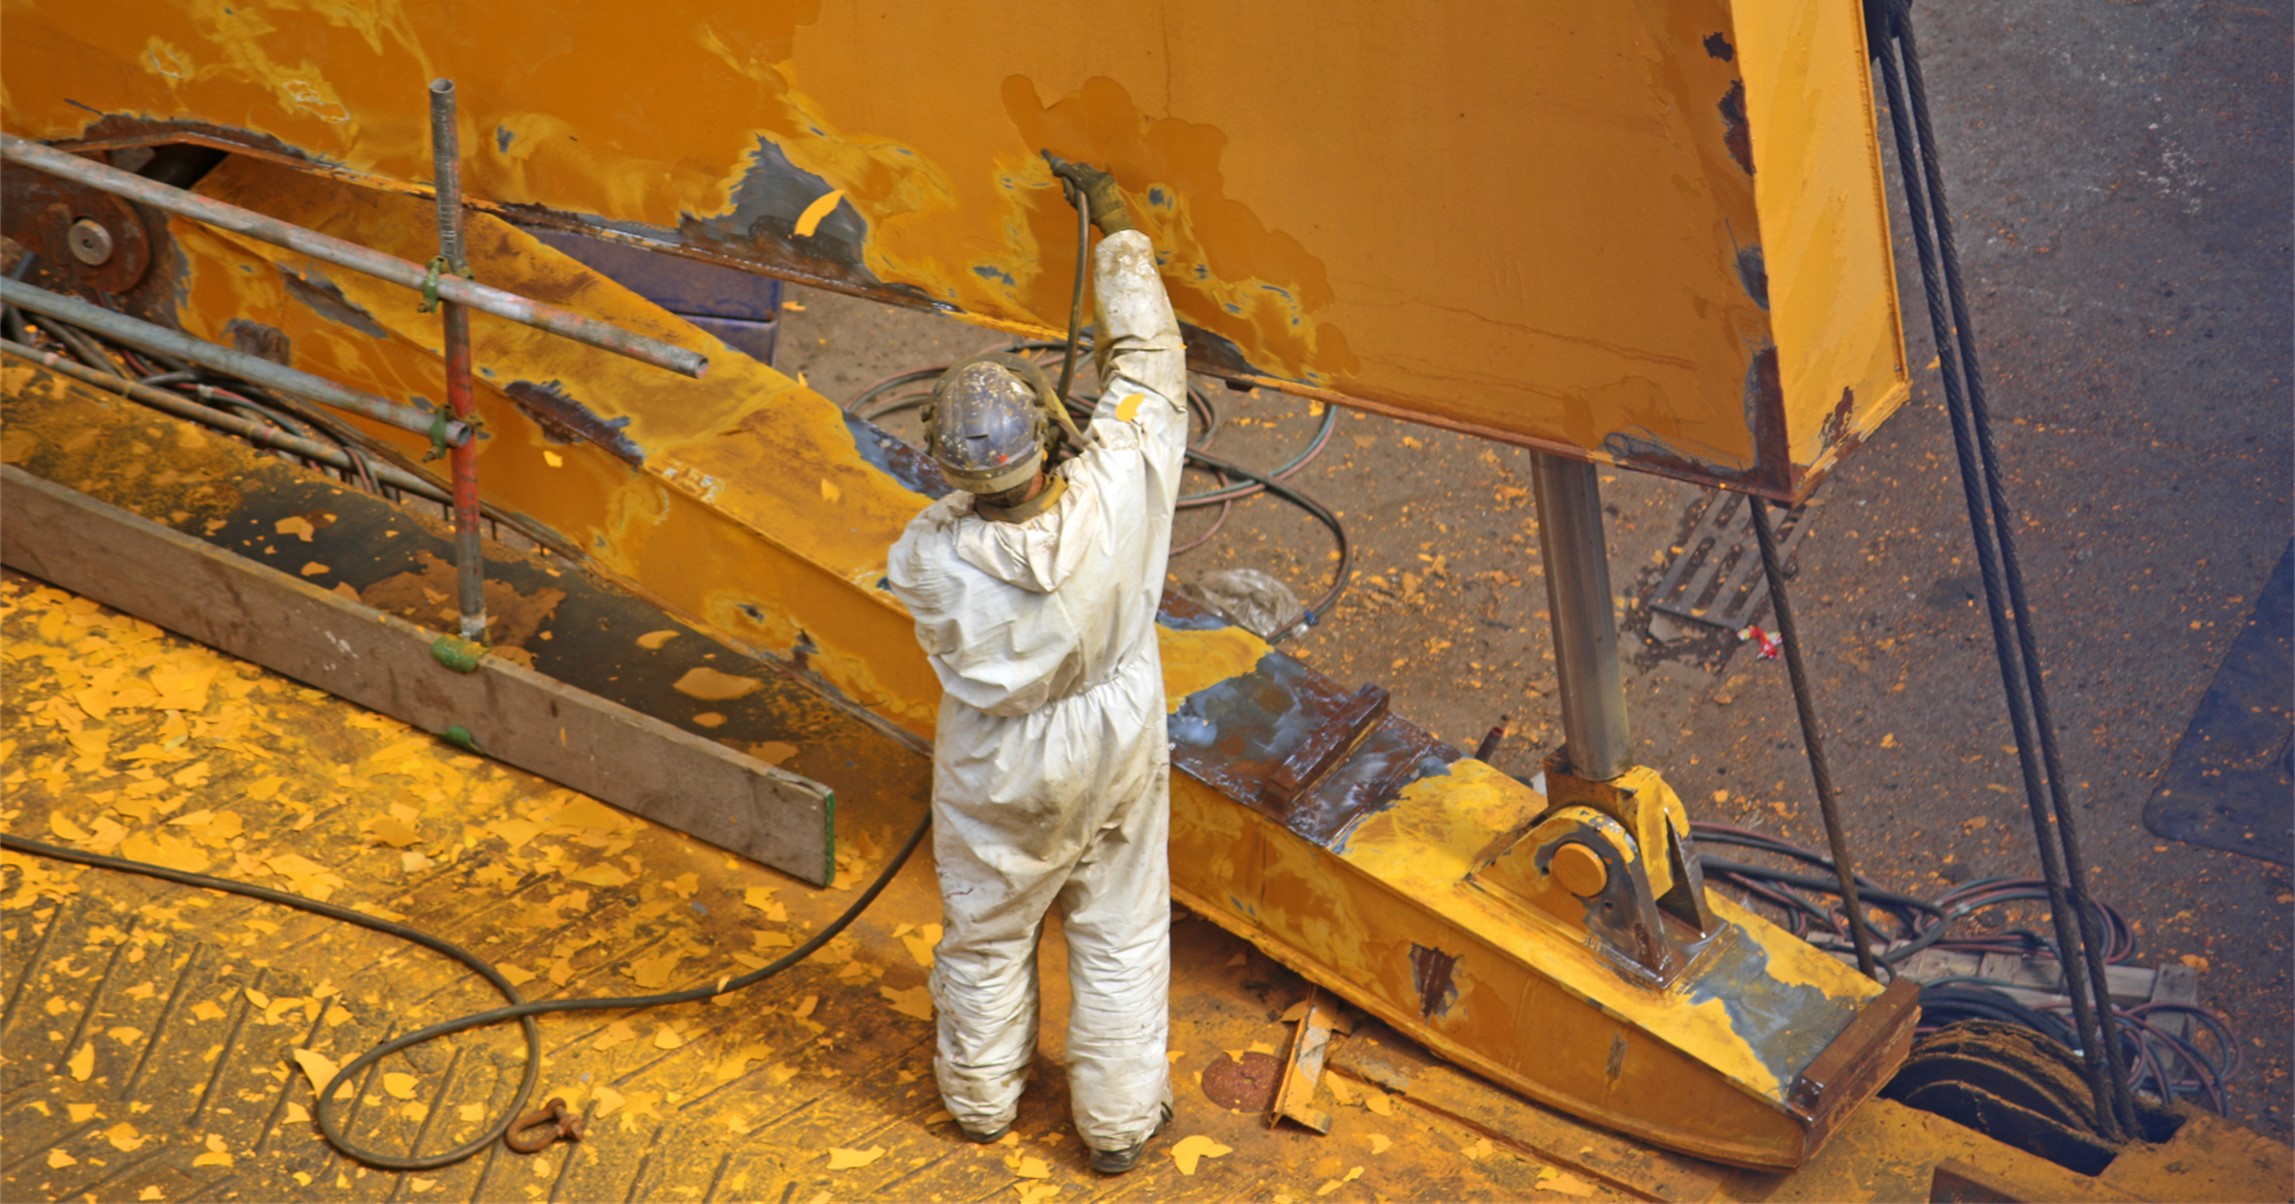 Shipyard worker stripping paint from machinery